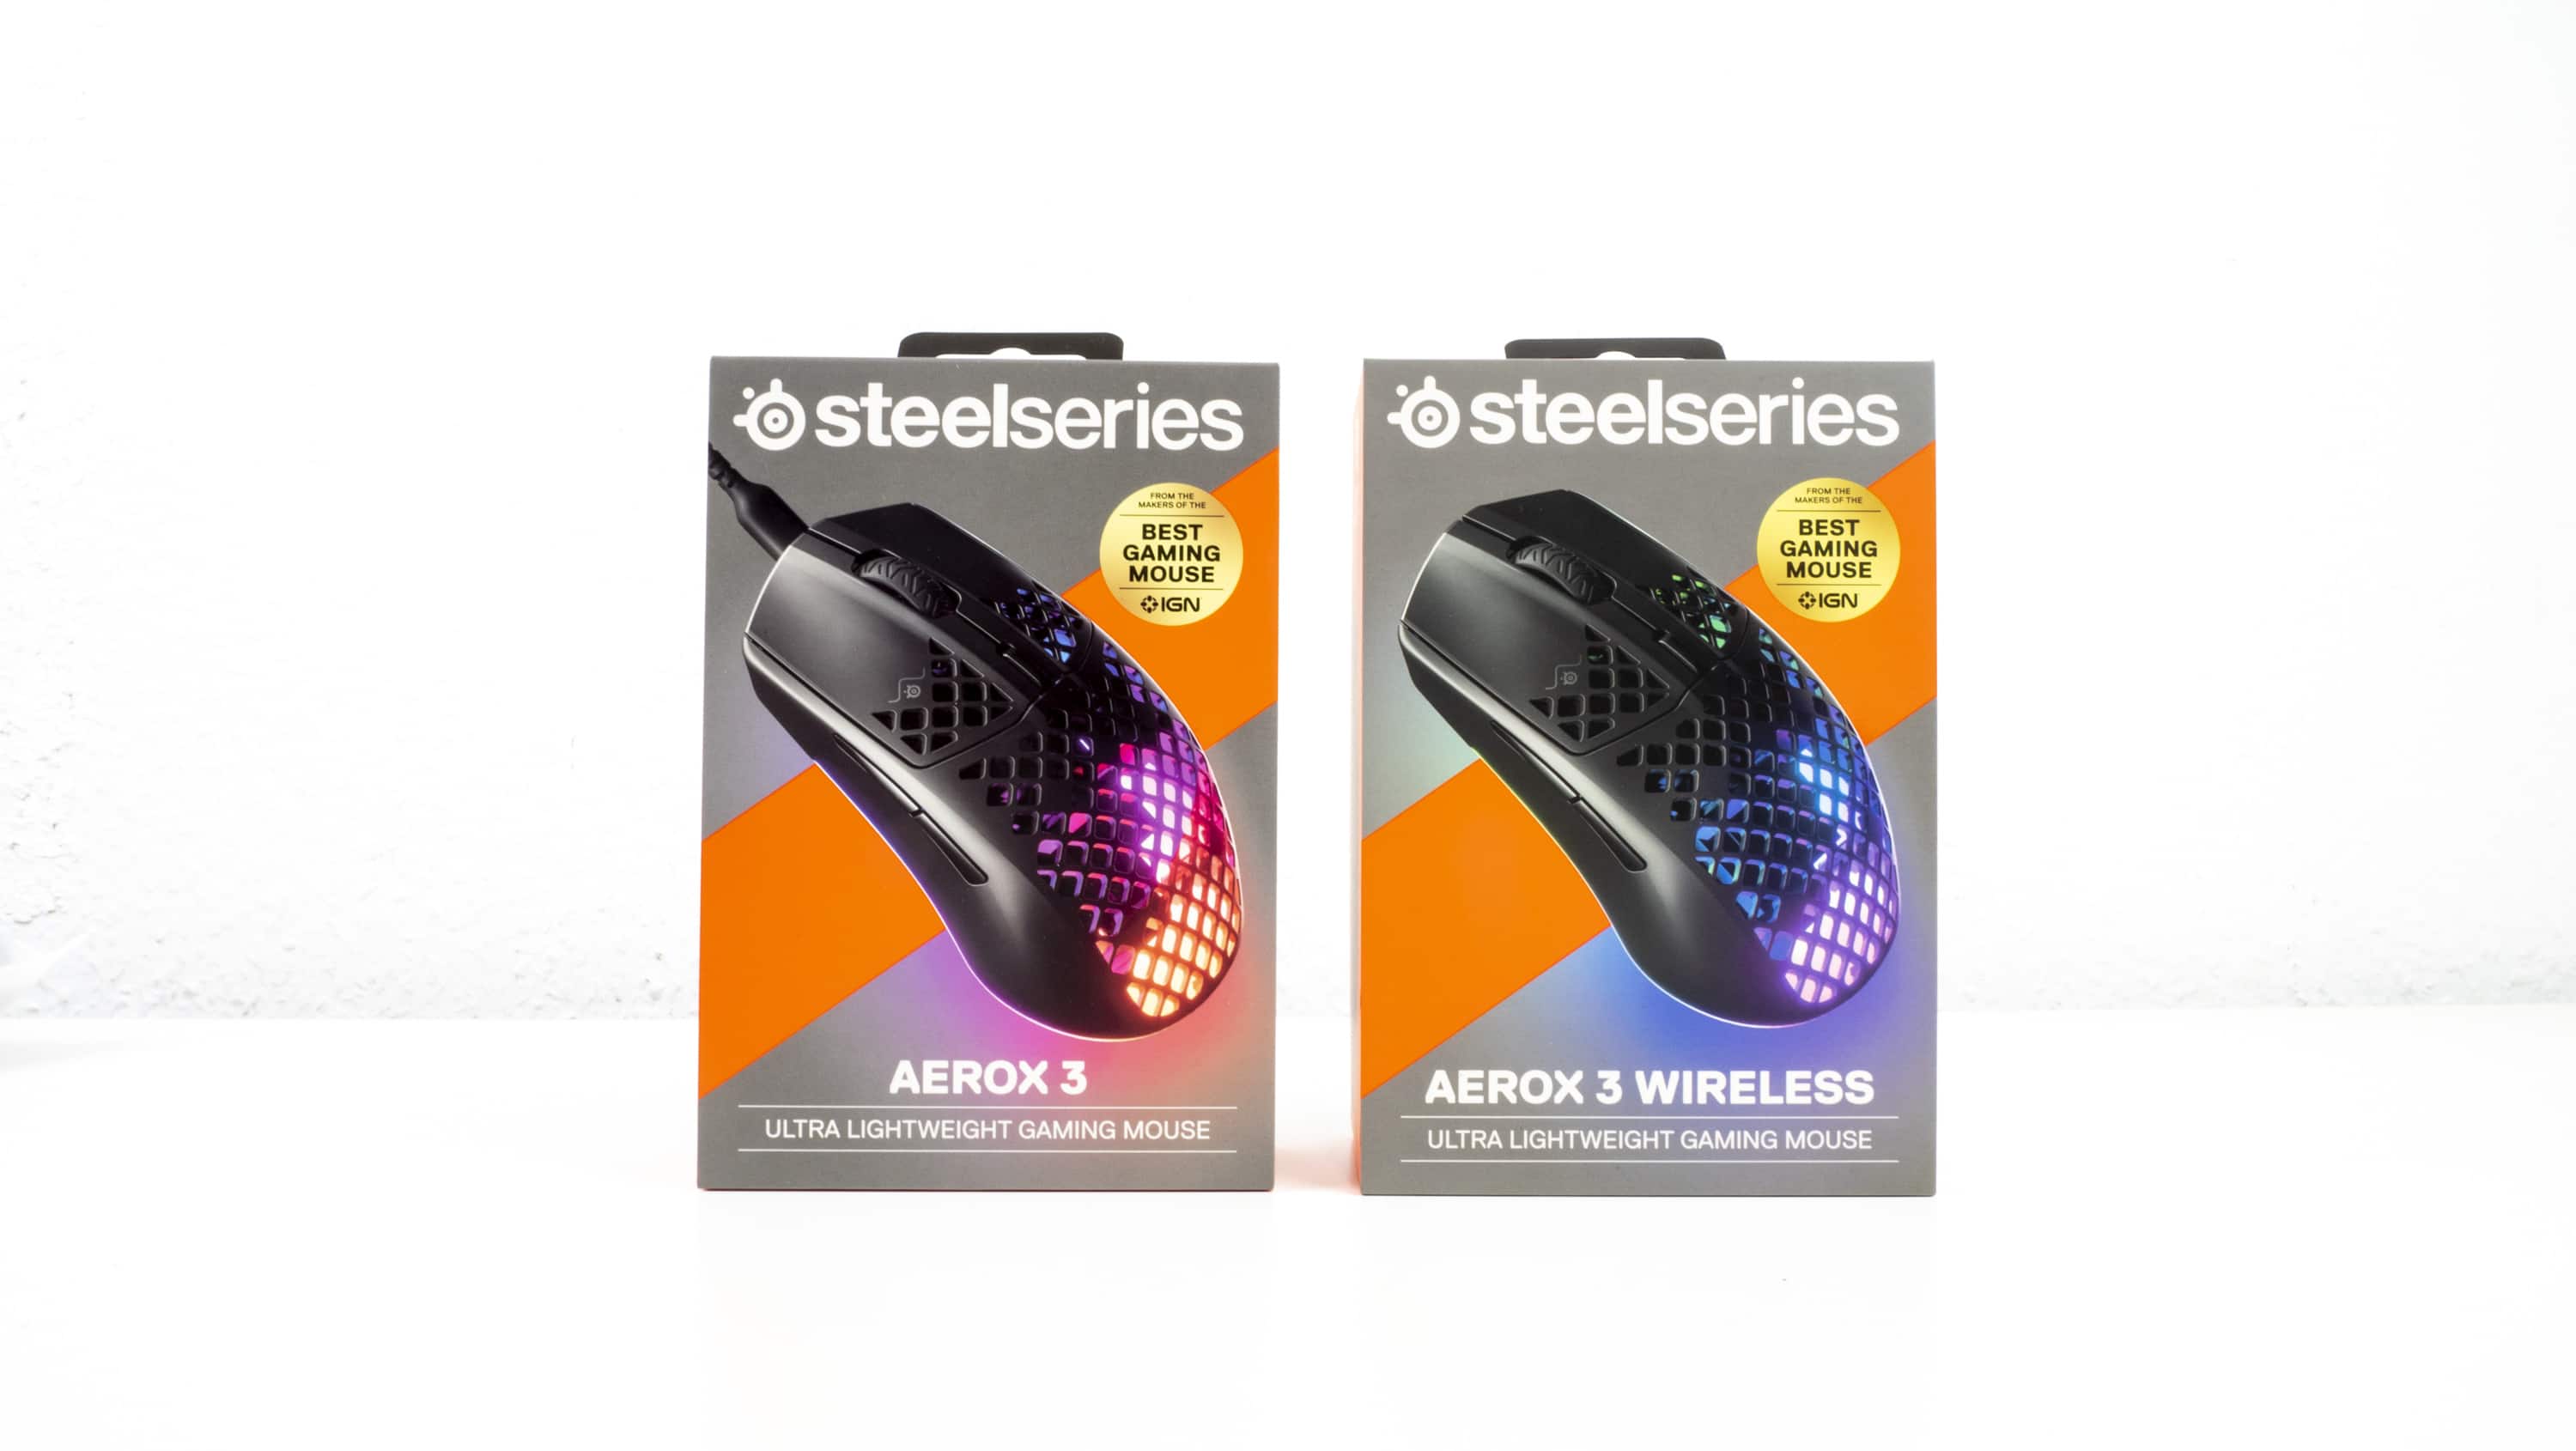 SteelSeries Aerox 3 & Aerox 3 Wireless in test: (Almost) light as a feather